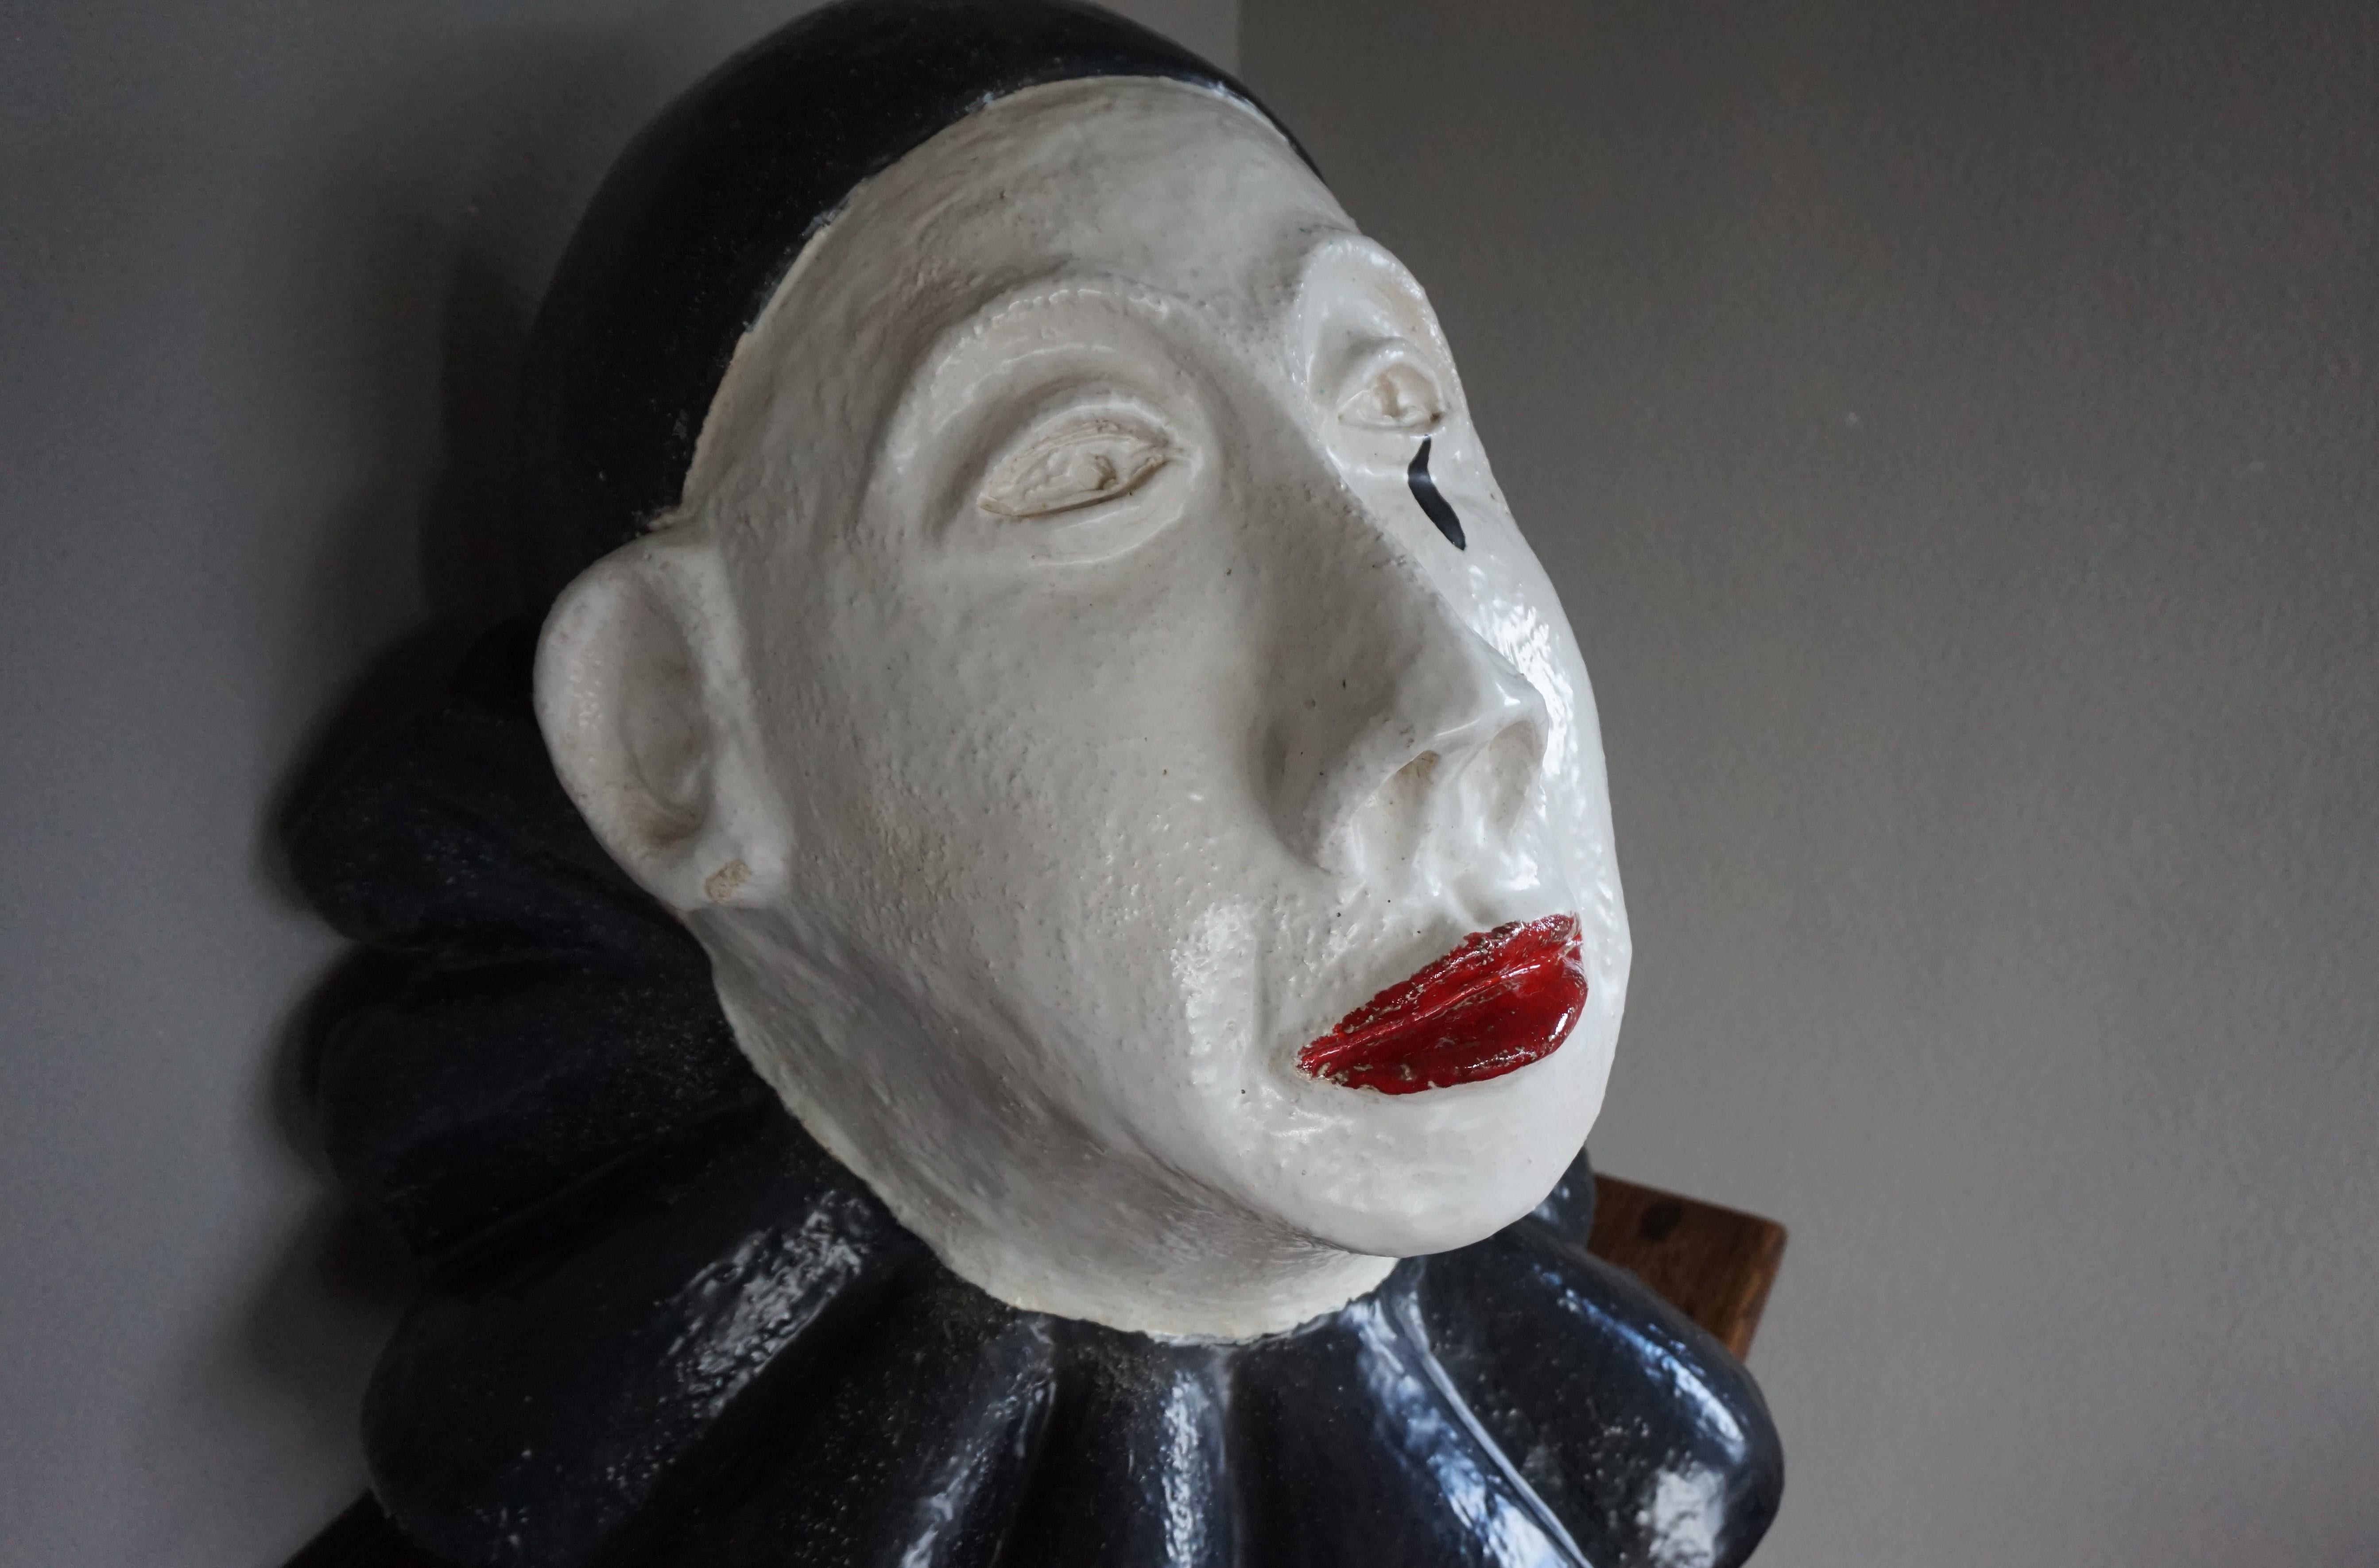 Large Handcrafted Glazed & Marked Midcentury Pierrot Bust / Pedrolino Sculpture For Sale 8